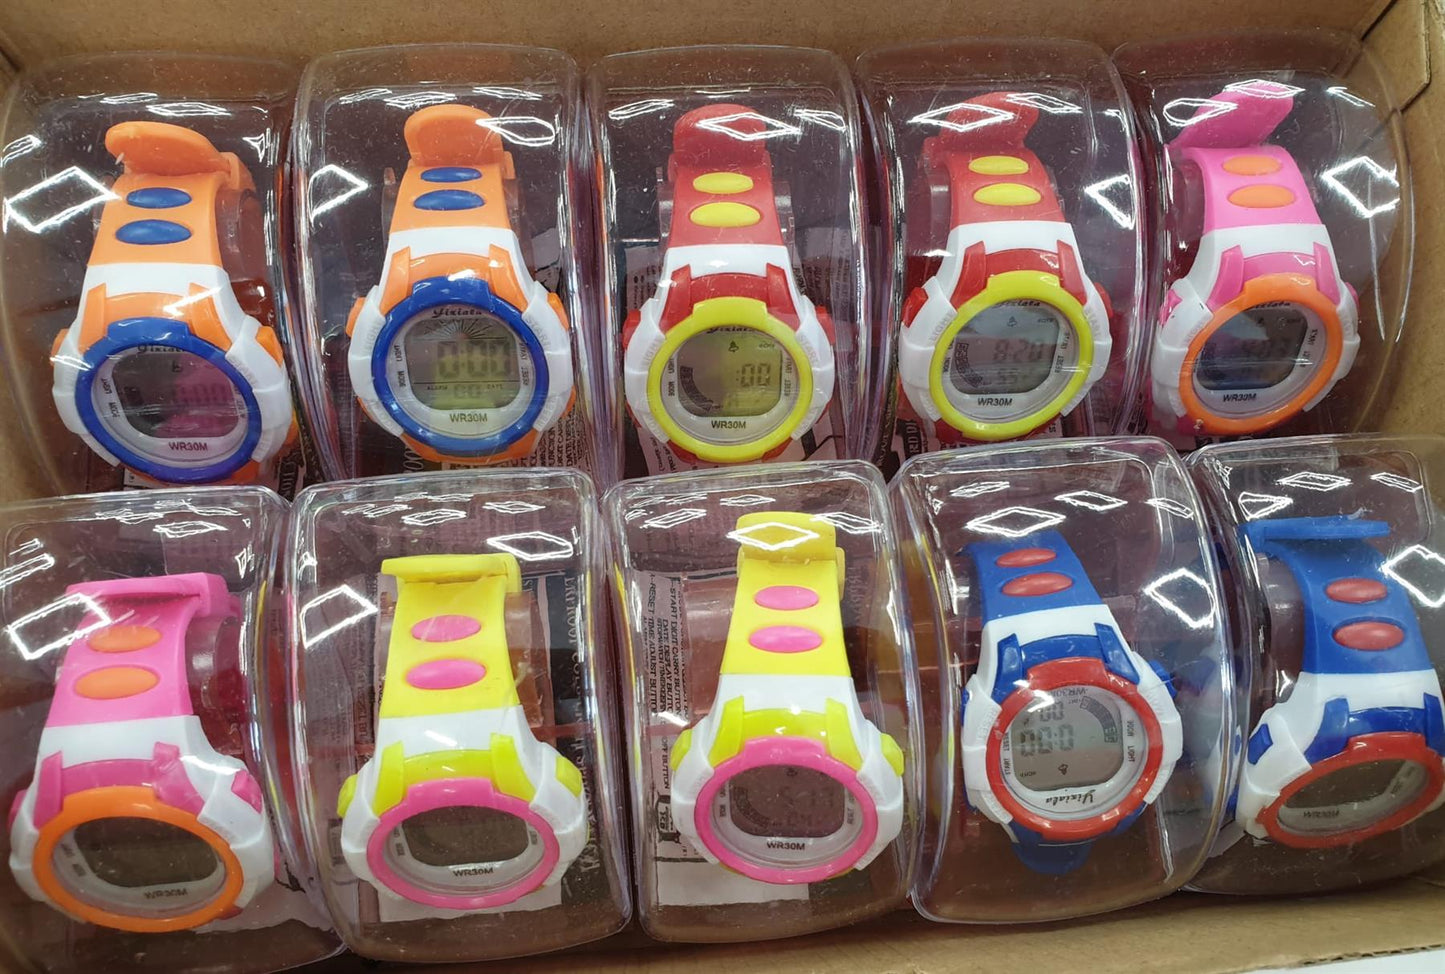 7 Light Childrens Girls & Boys Sports Light Digital Waterproof assorted stlyes and colour's varied watch